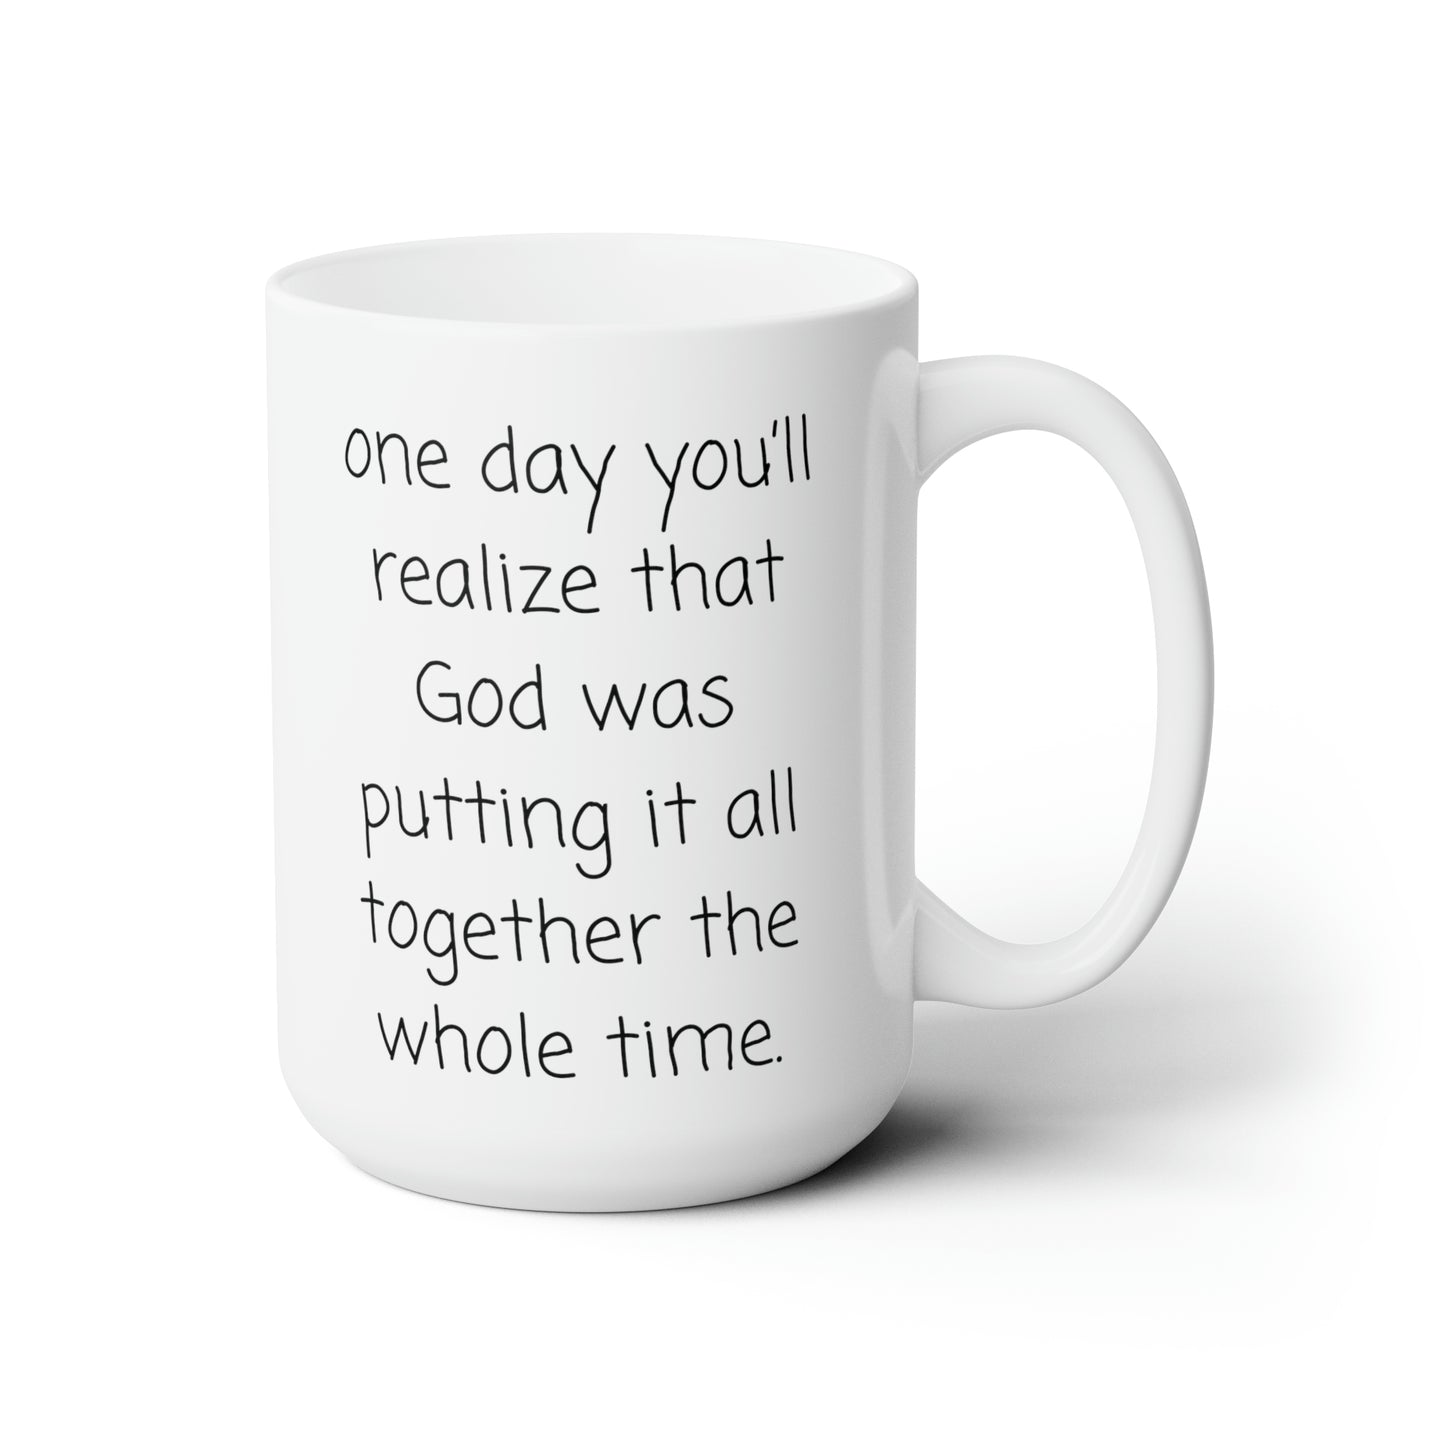 one day you'll realize God was putting it all together the whole time.-gianna jessen 15oz ceramic mug